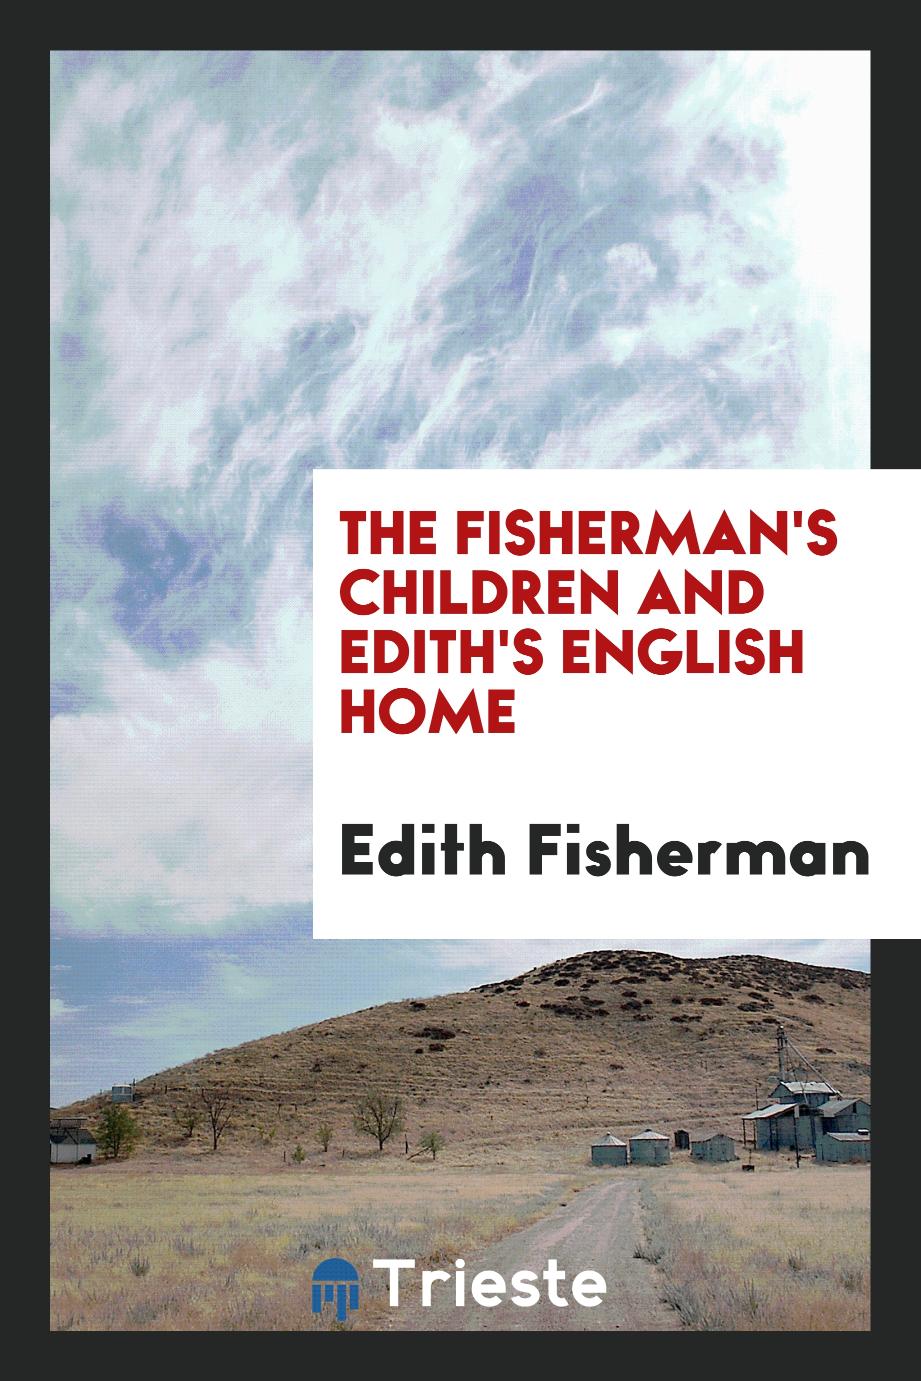 The Fisherman's Children and Edith's English Home